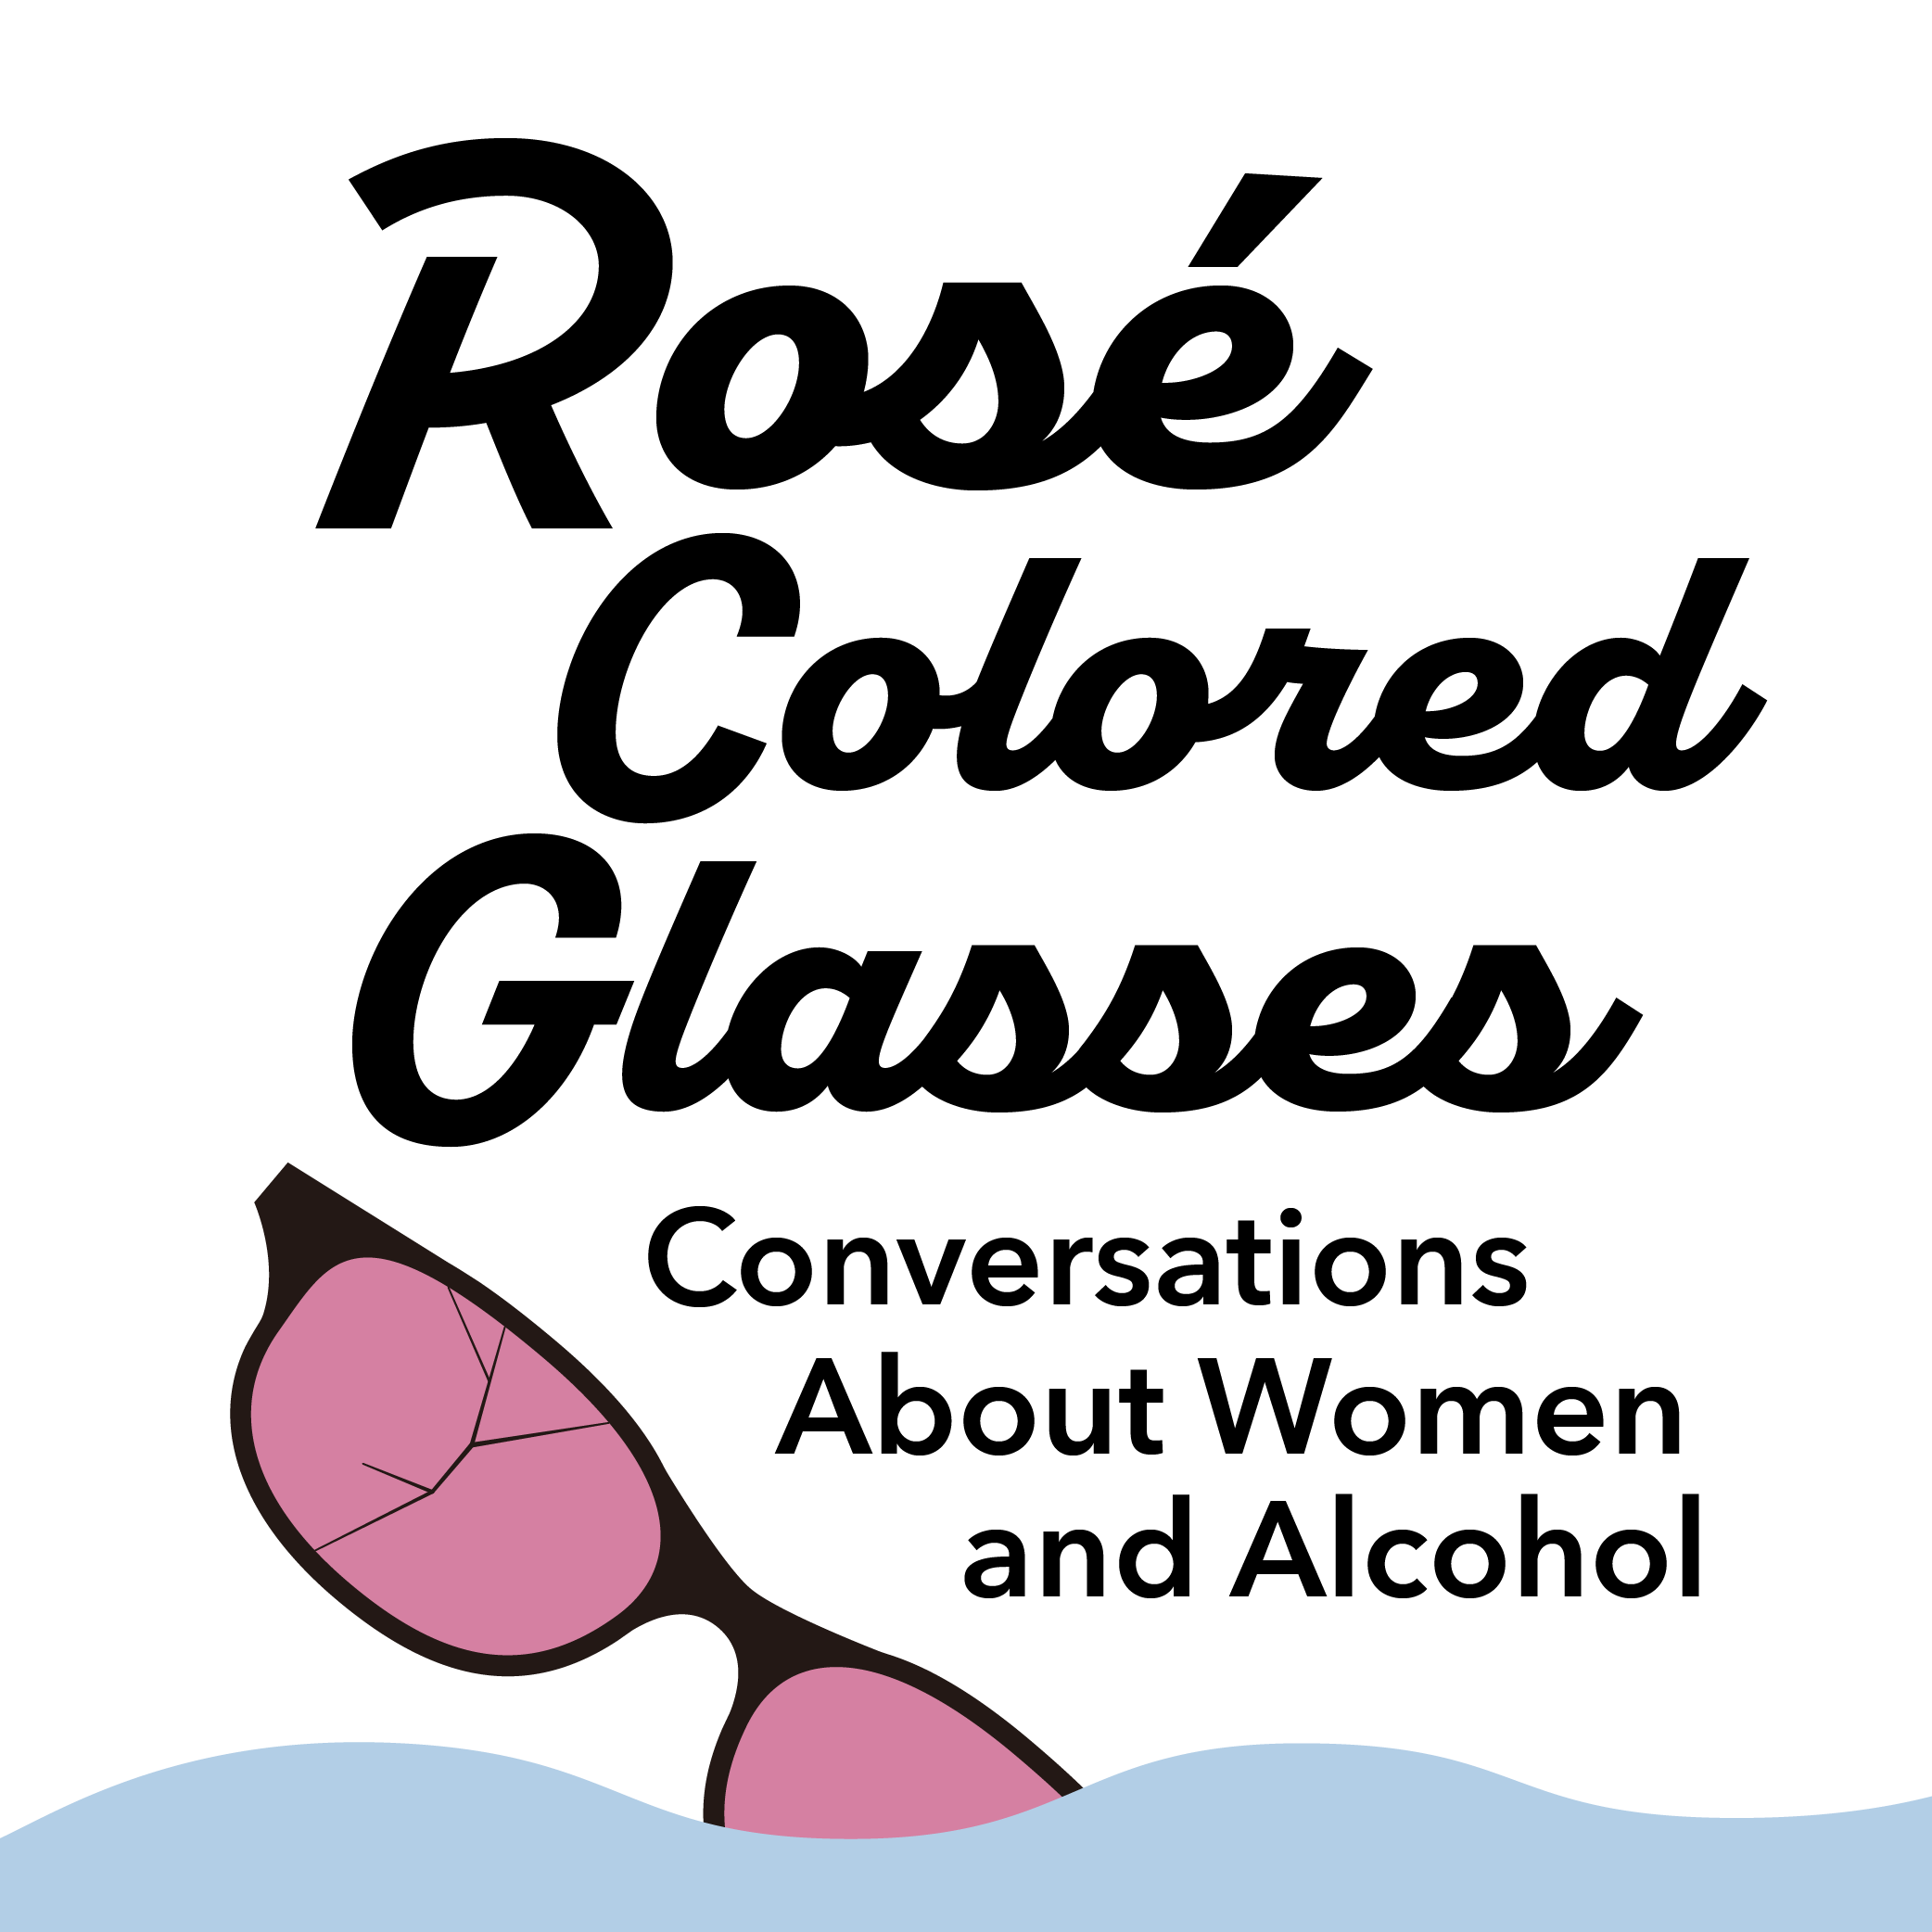 rose colored glasses conversations about women and alcohol